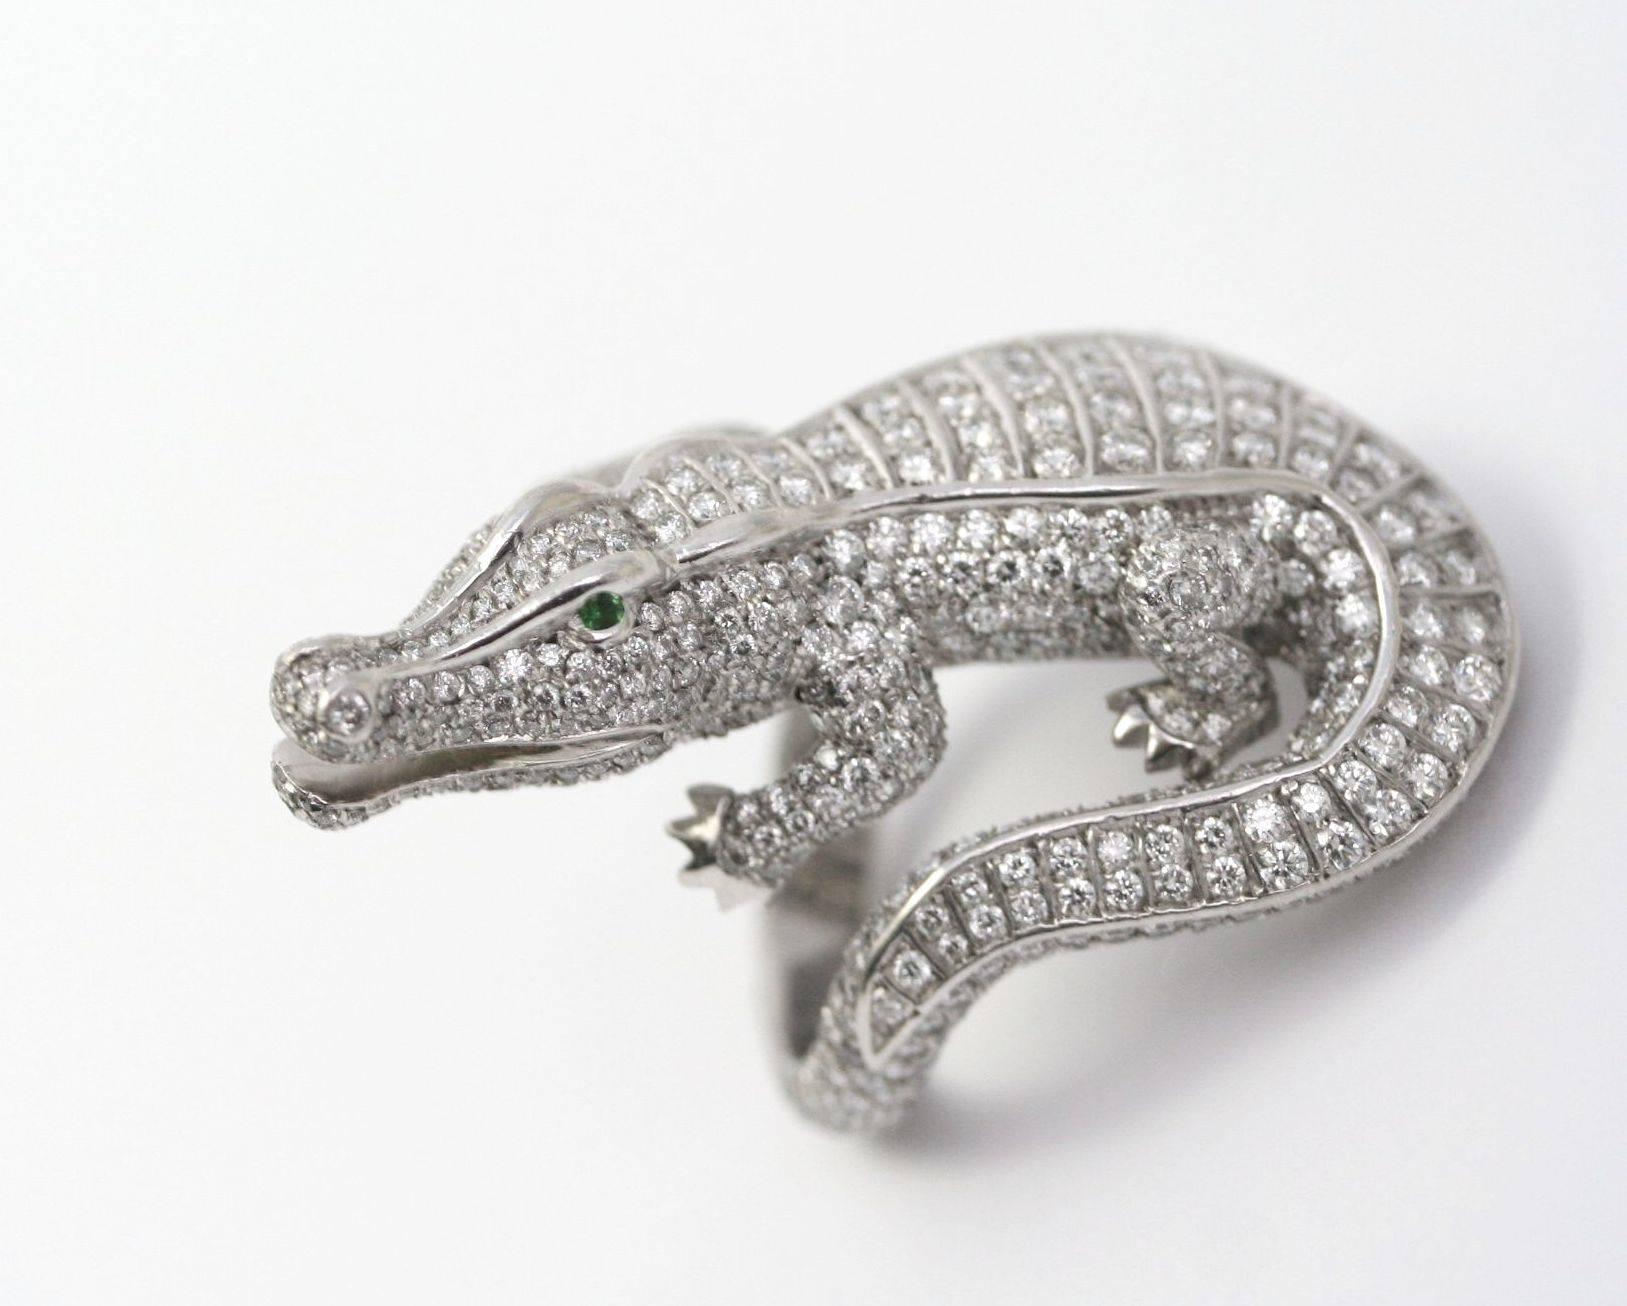 CARTIER Alligator Ring in platinum, round-cut diamonds (approximately 4,5 carats) and emerald eyes. 
1980-1990.
Signed and Numbered. 
Ring size 53 (French size). 6,5 (US size)
(39.15 grams)
Comes with a Cartier document 